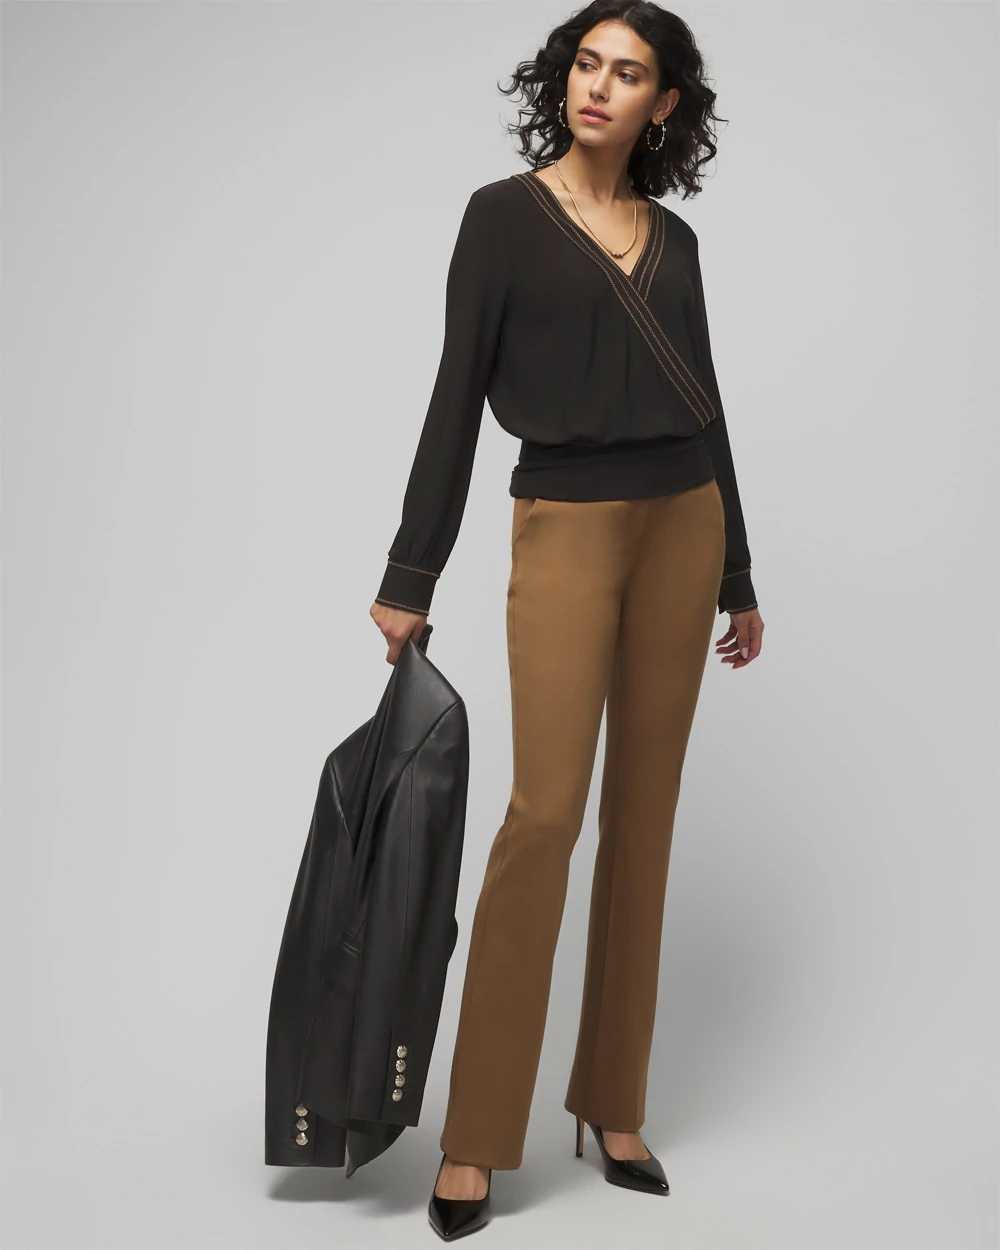 Contrast Stretch Long Sleeve Surplice Top click to view larger image.